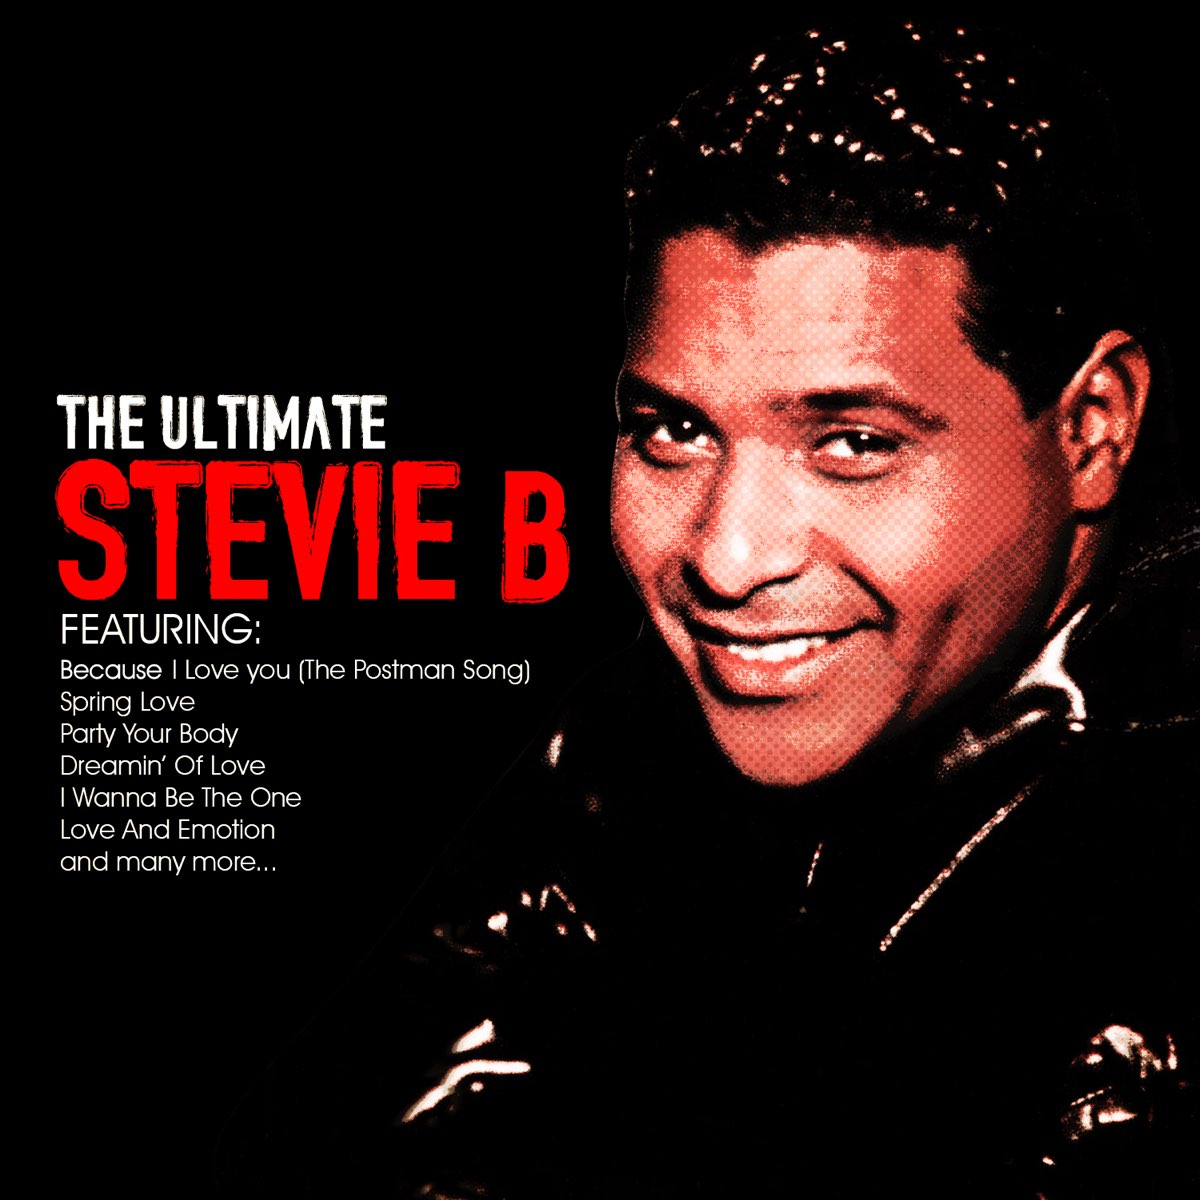 ‎The Ultimate Stevie B (Remastered) by Stevie B on Apple Music